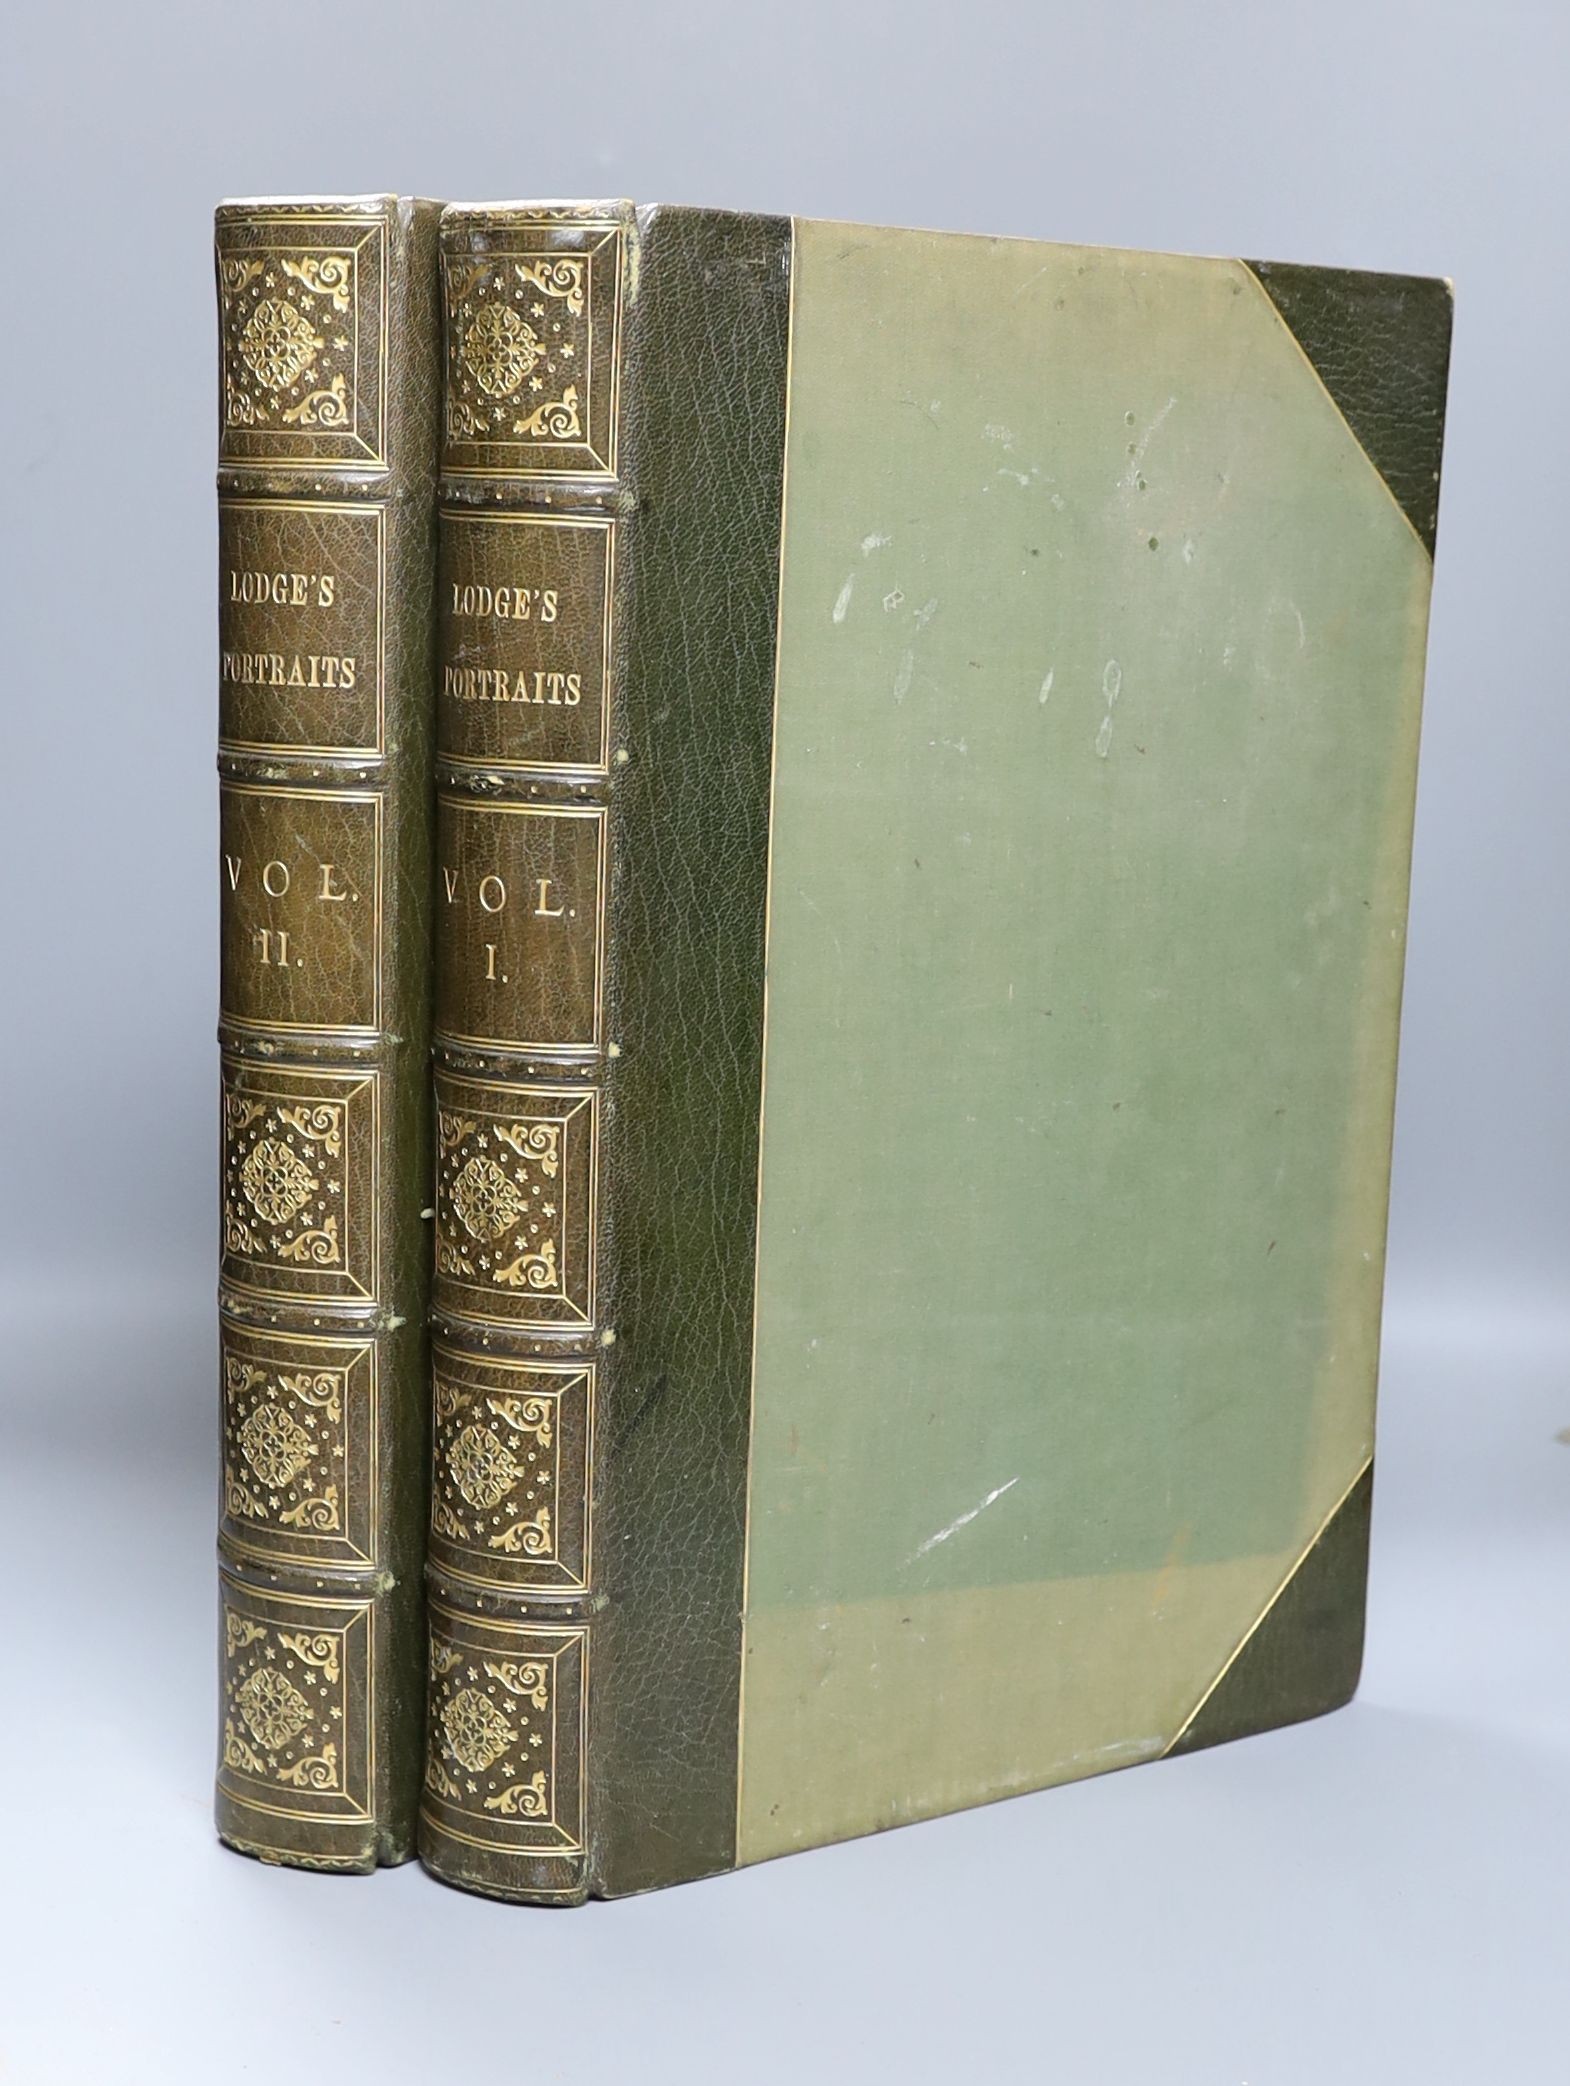 Lodge, Edmund - Portraits of Illustrious Personages of Great Britain ... vols 1 & 2 (of 4). numerous engraved plates, sunbscriber's list, half titles; later green half morocco and cloth, gilt-decorated and lettered panel